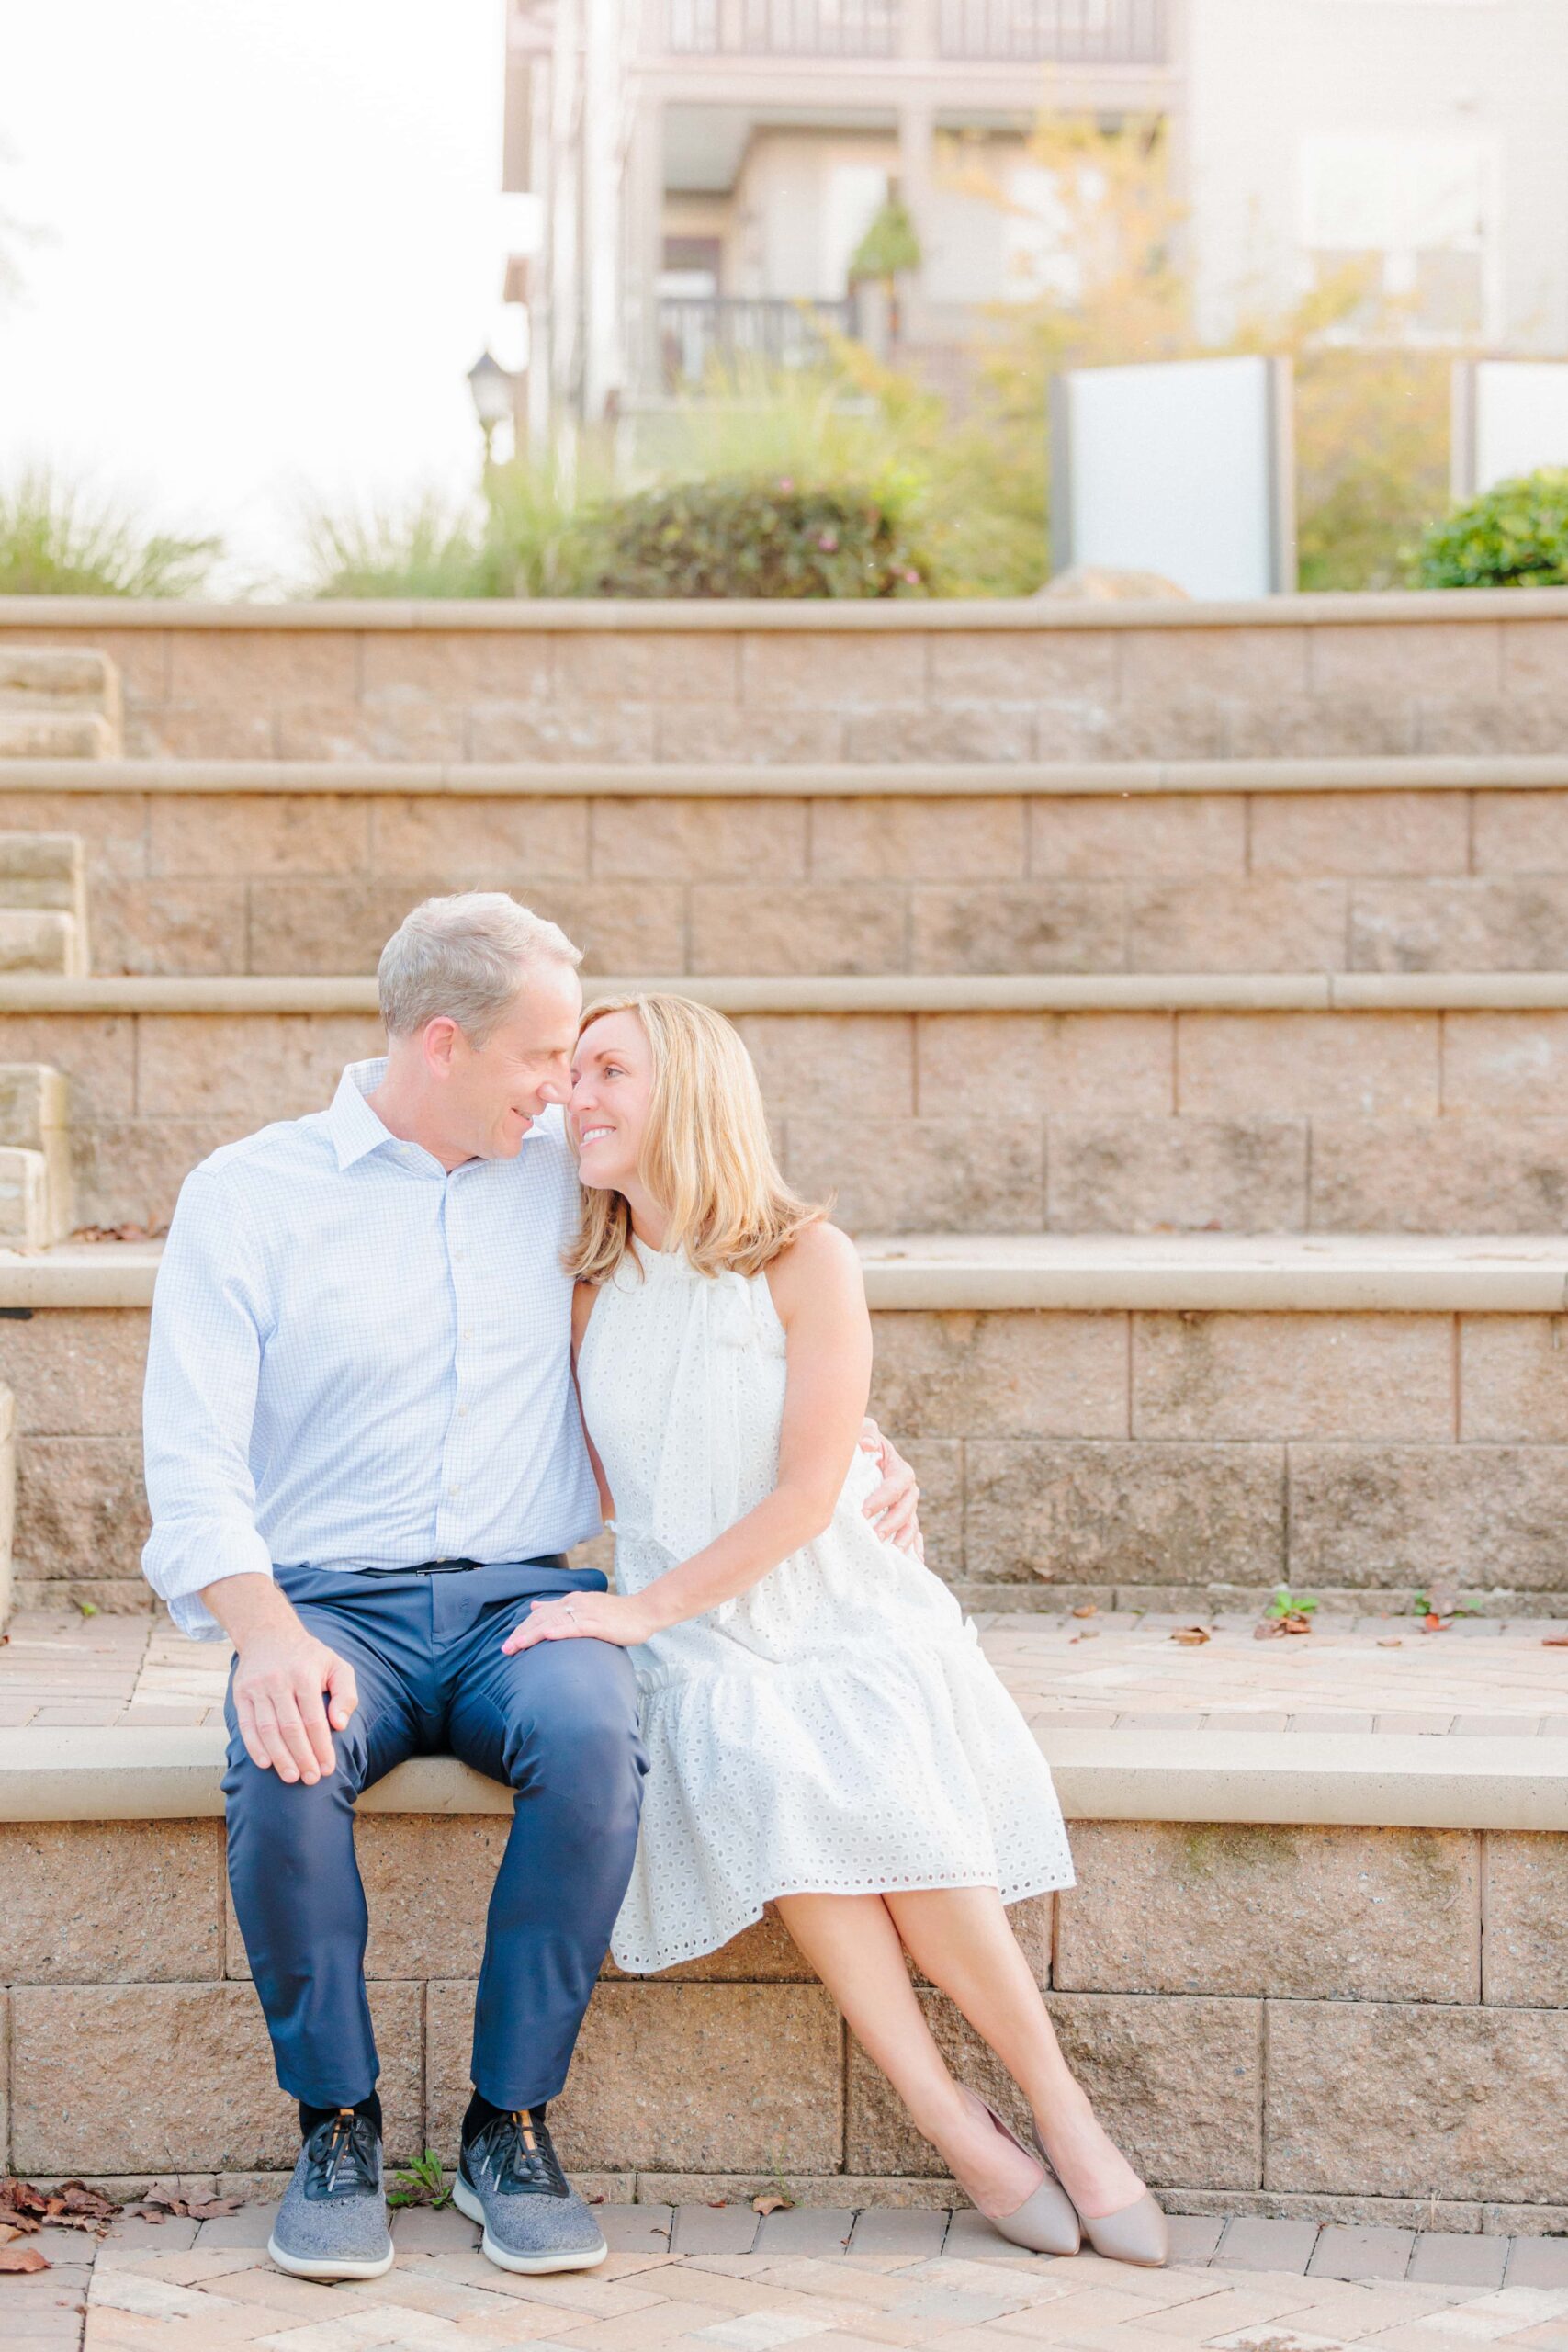 This image of Janet and Matt sitting on the stone steps together was taken in Rock Hill, SC.